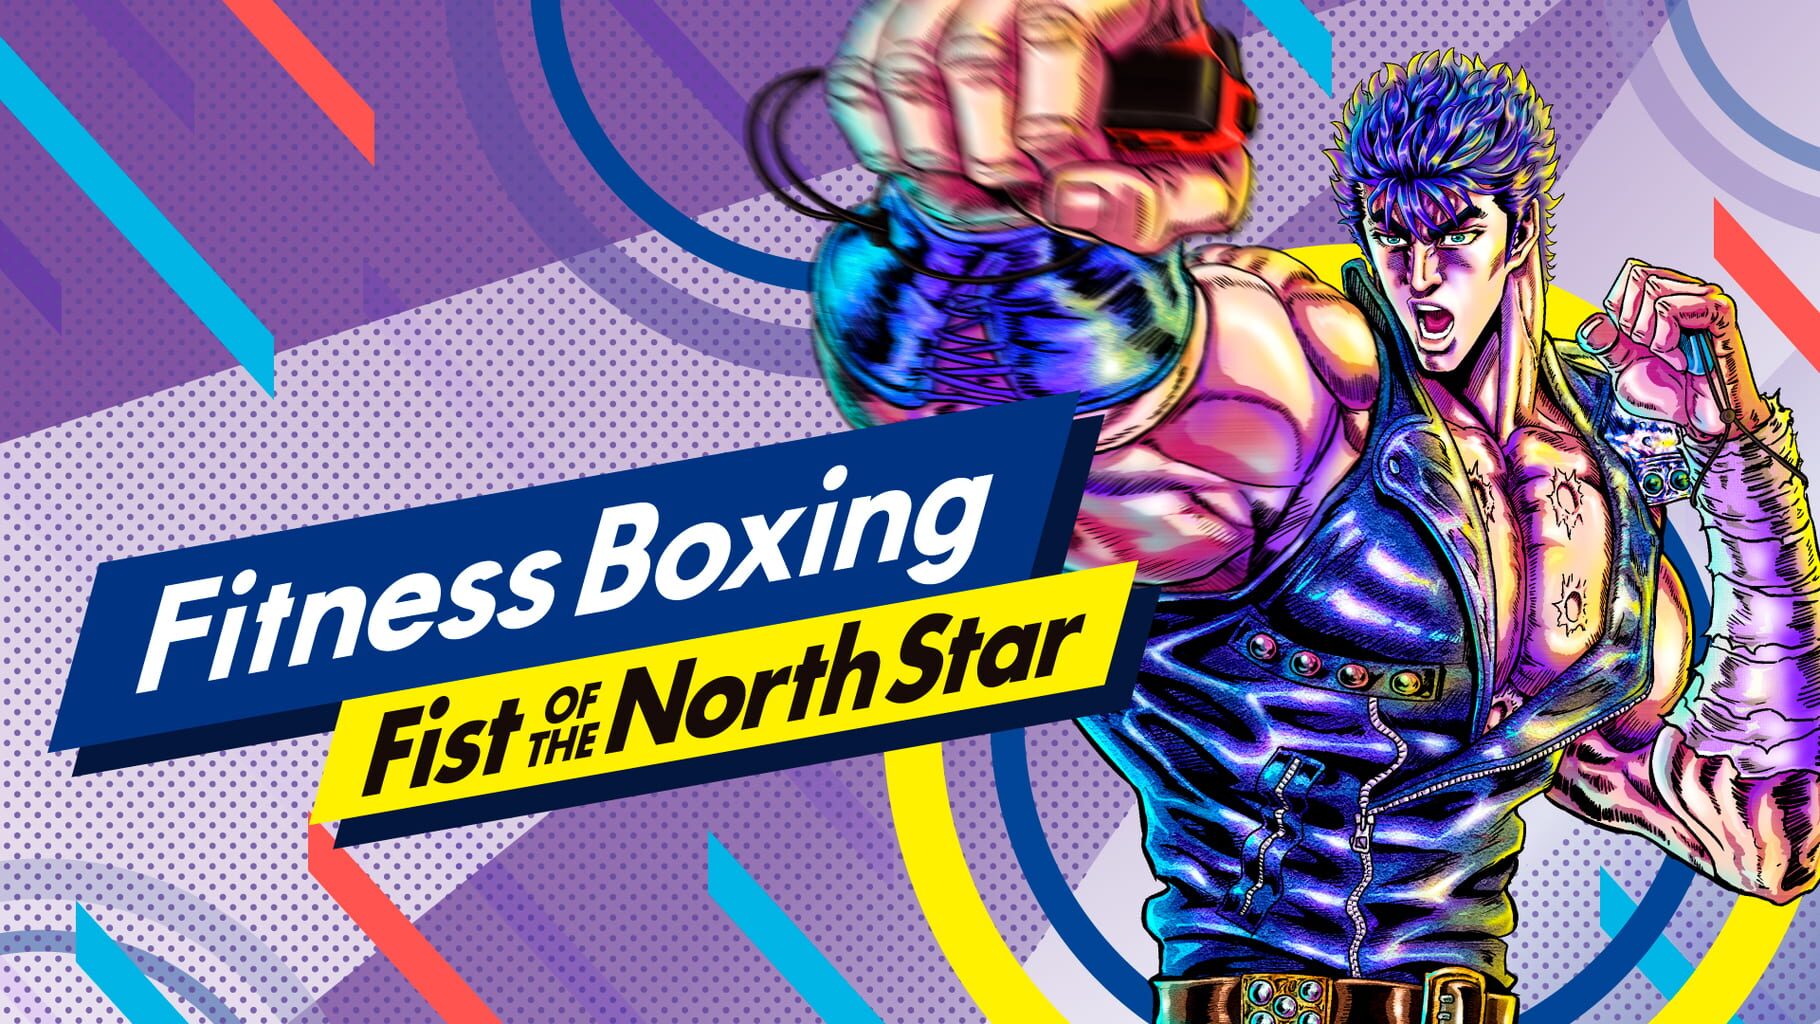 Fitness Boxing Fist of the North Star artwork